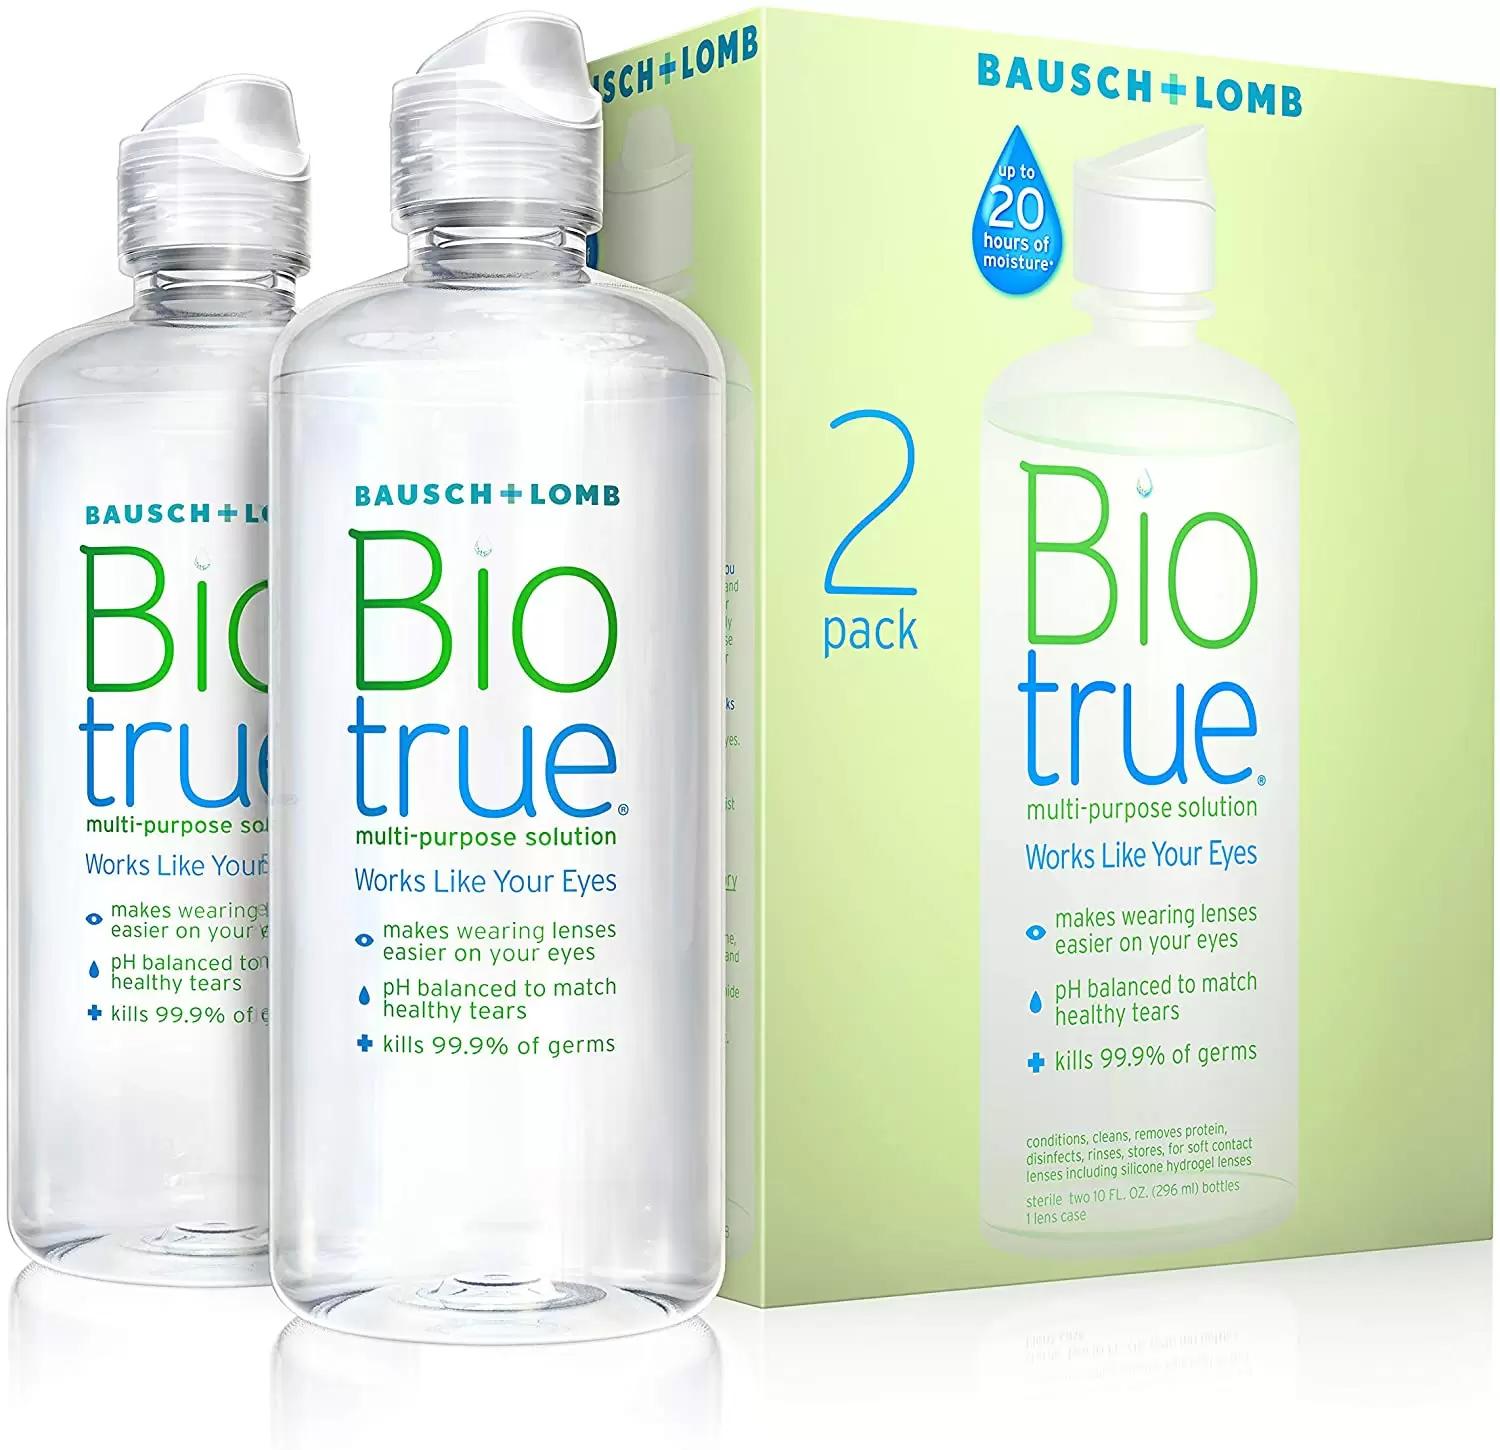 2 Bausch + Lomb Biotrue Soft Contact Lens Multi-Purpose Solution for $9.82 Shipped